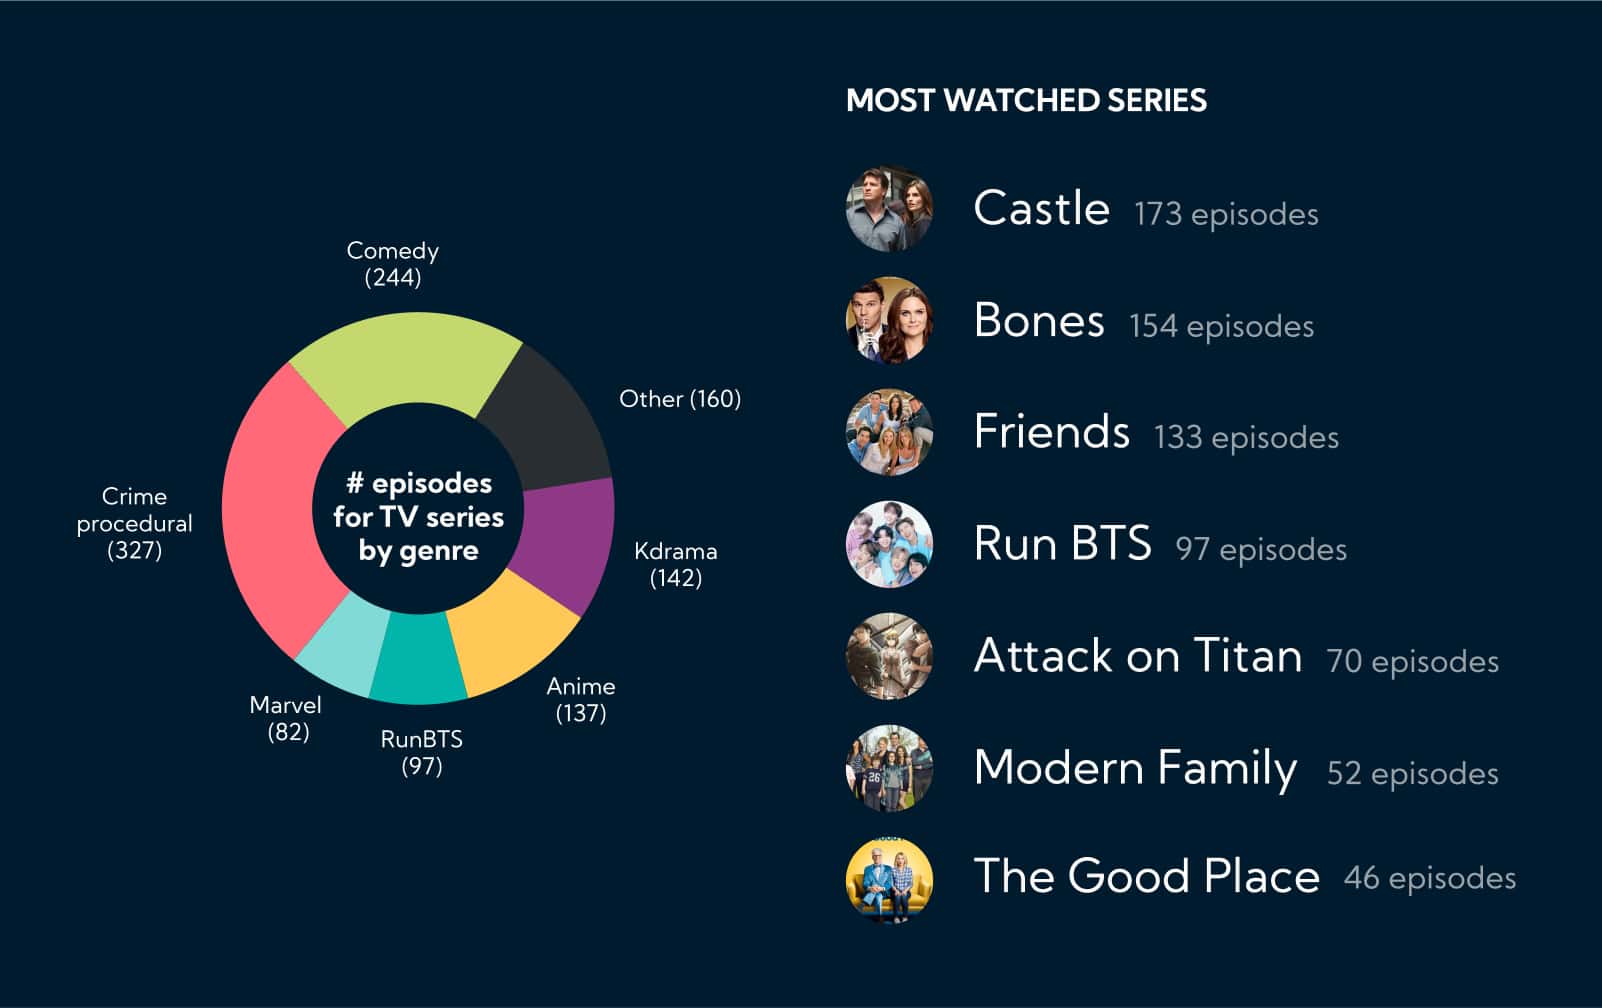 Left: Donut chart of genre of series watched. Right: A list of most watched series.